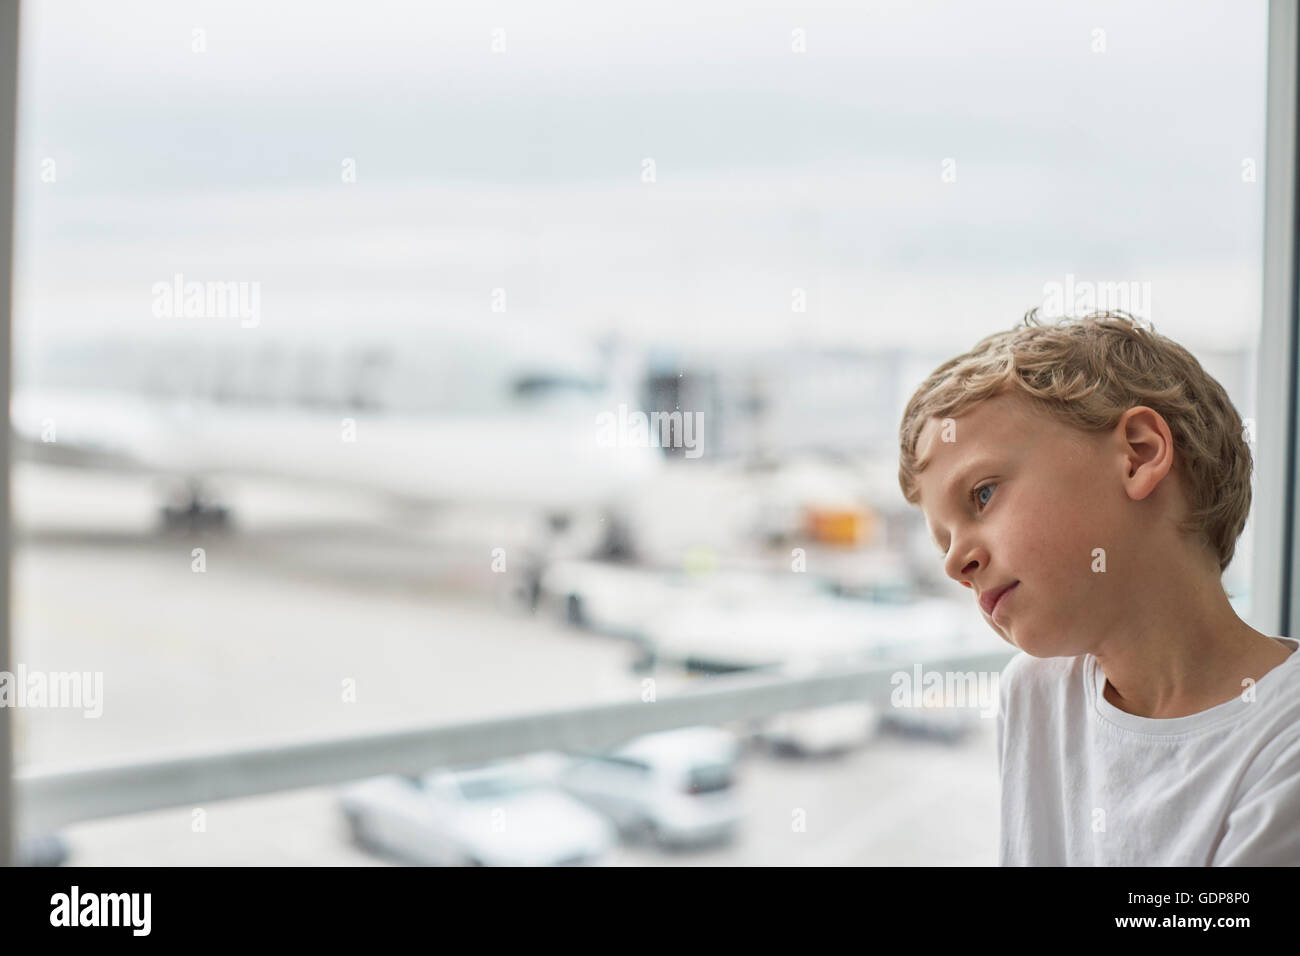 Boy looking out of airport window Stock Photo